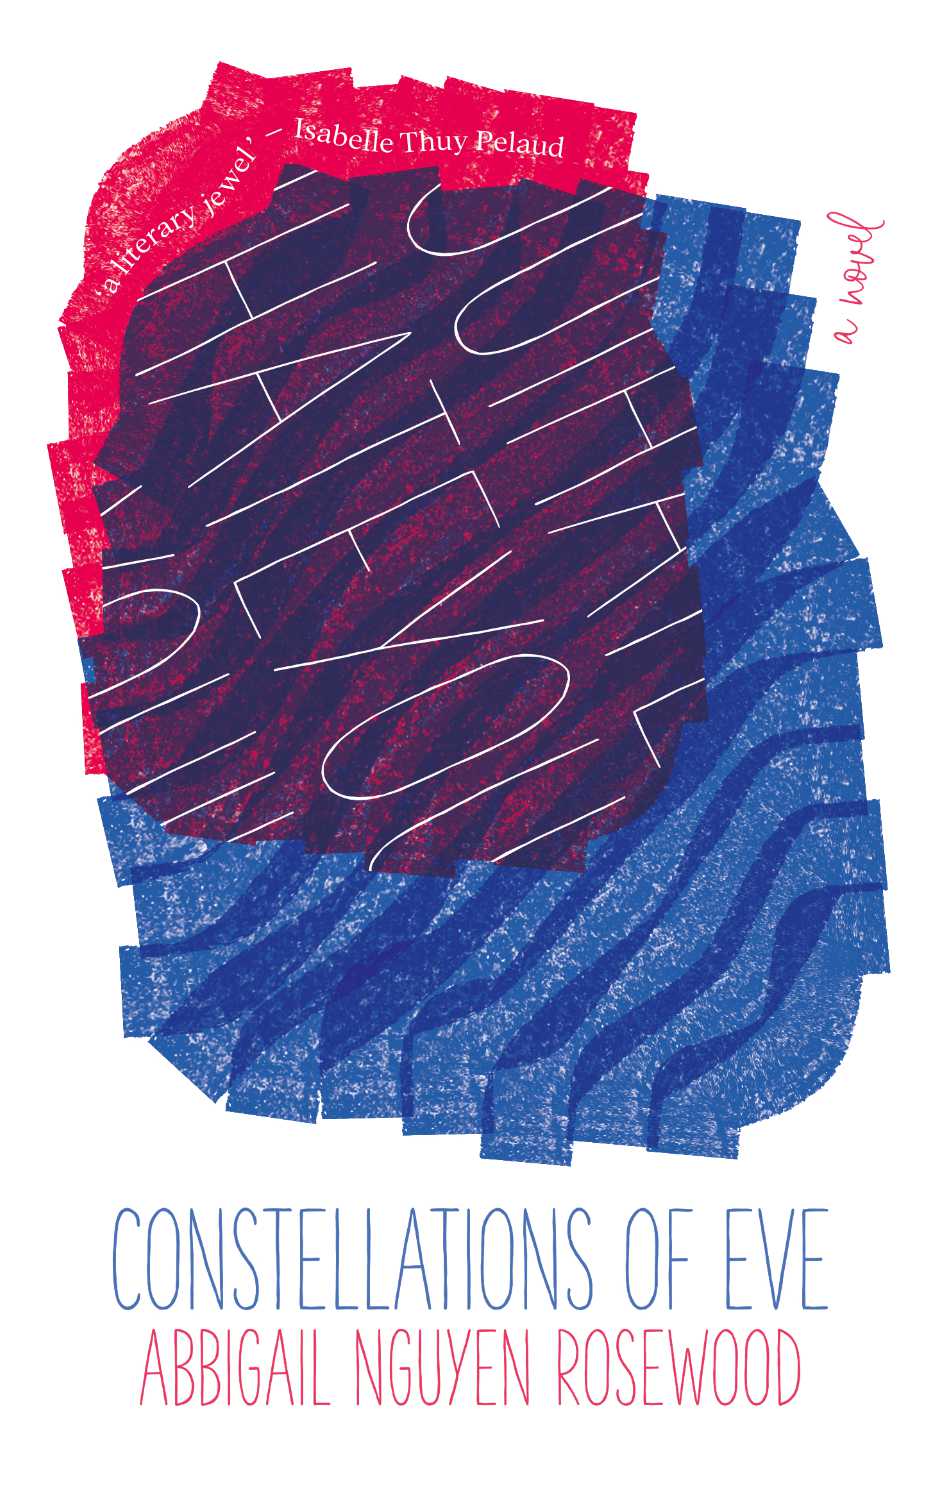 Cover features a bright red and blue abstract image of a heart/water with the text ‘I HATE YOU’ repeated across it’s centre.